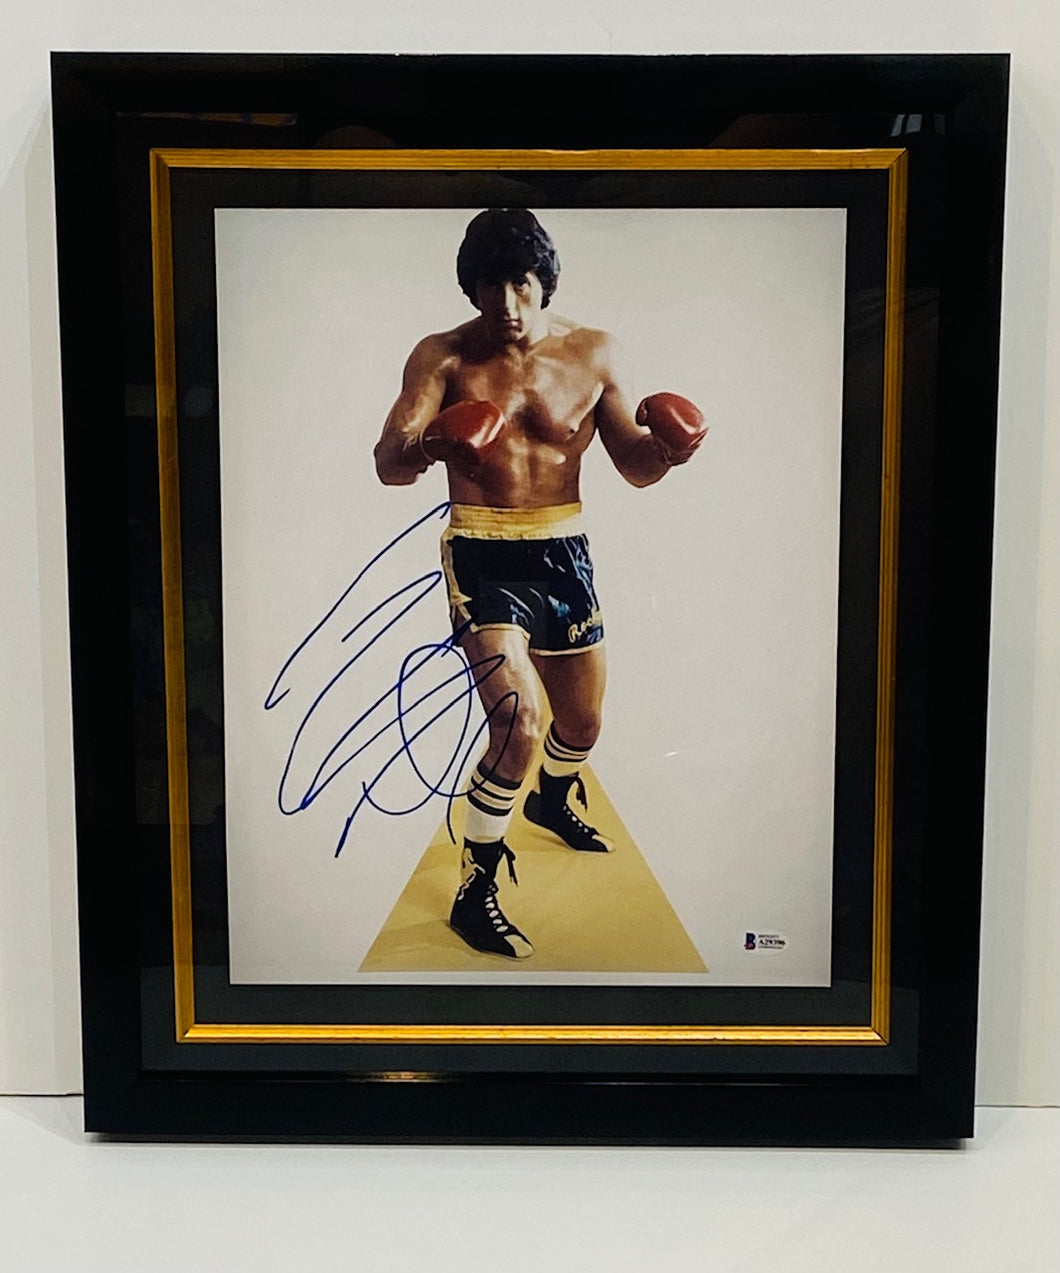 SYLVESTER STALLONE HAND-SIGNED PHOTOGRAPHIC PRINT